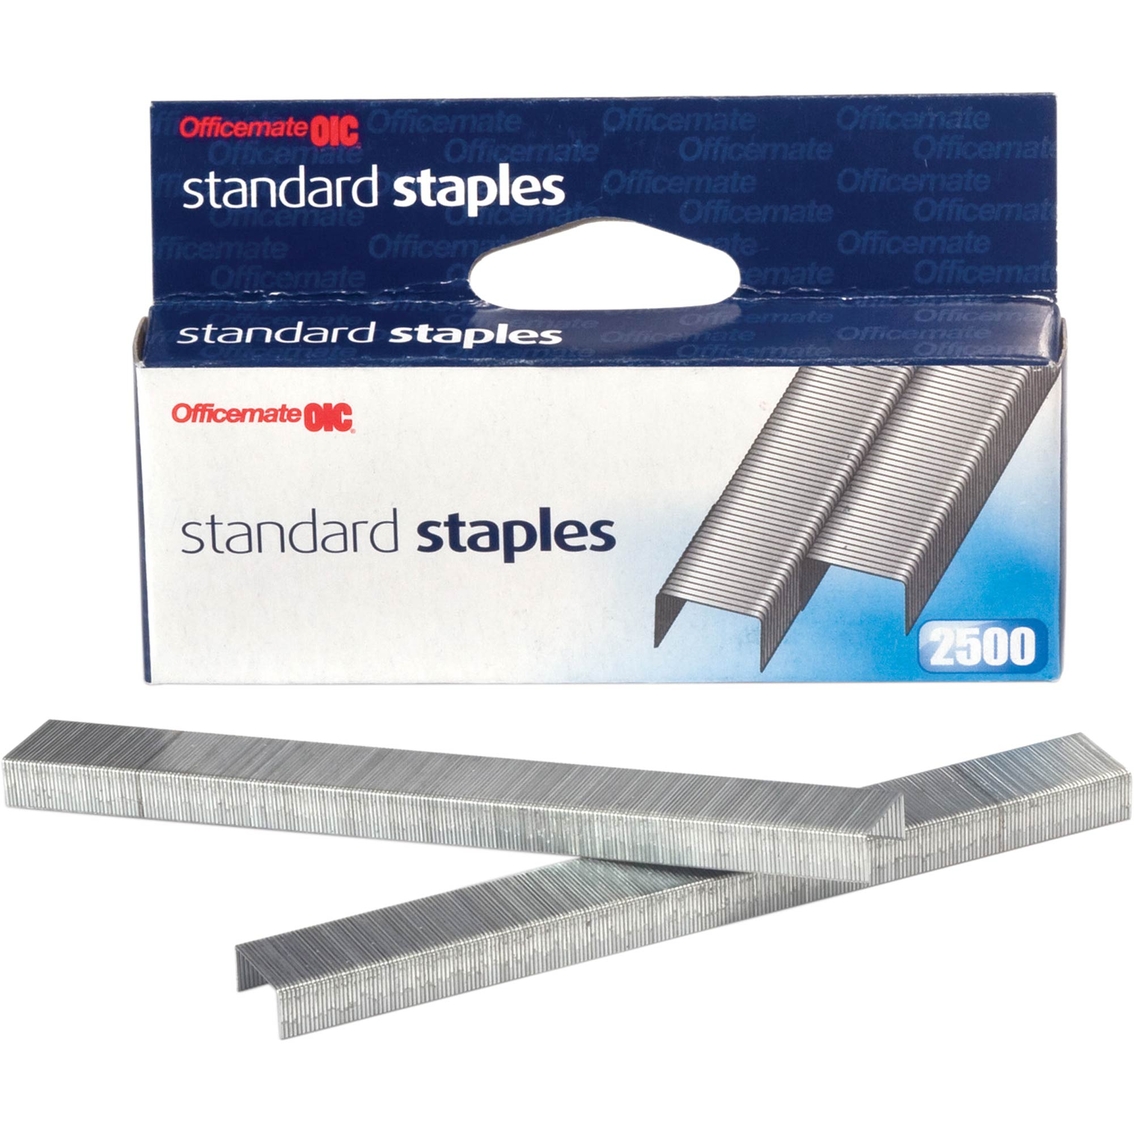 Officemate Standard Staples 2500 ct. Box